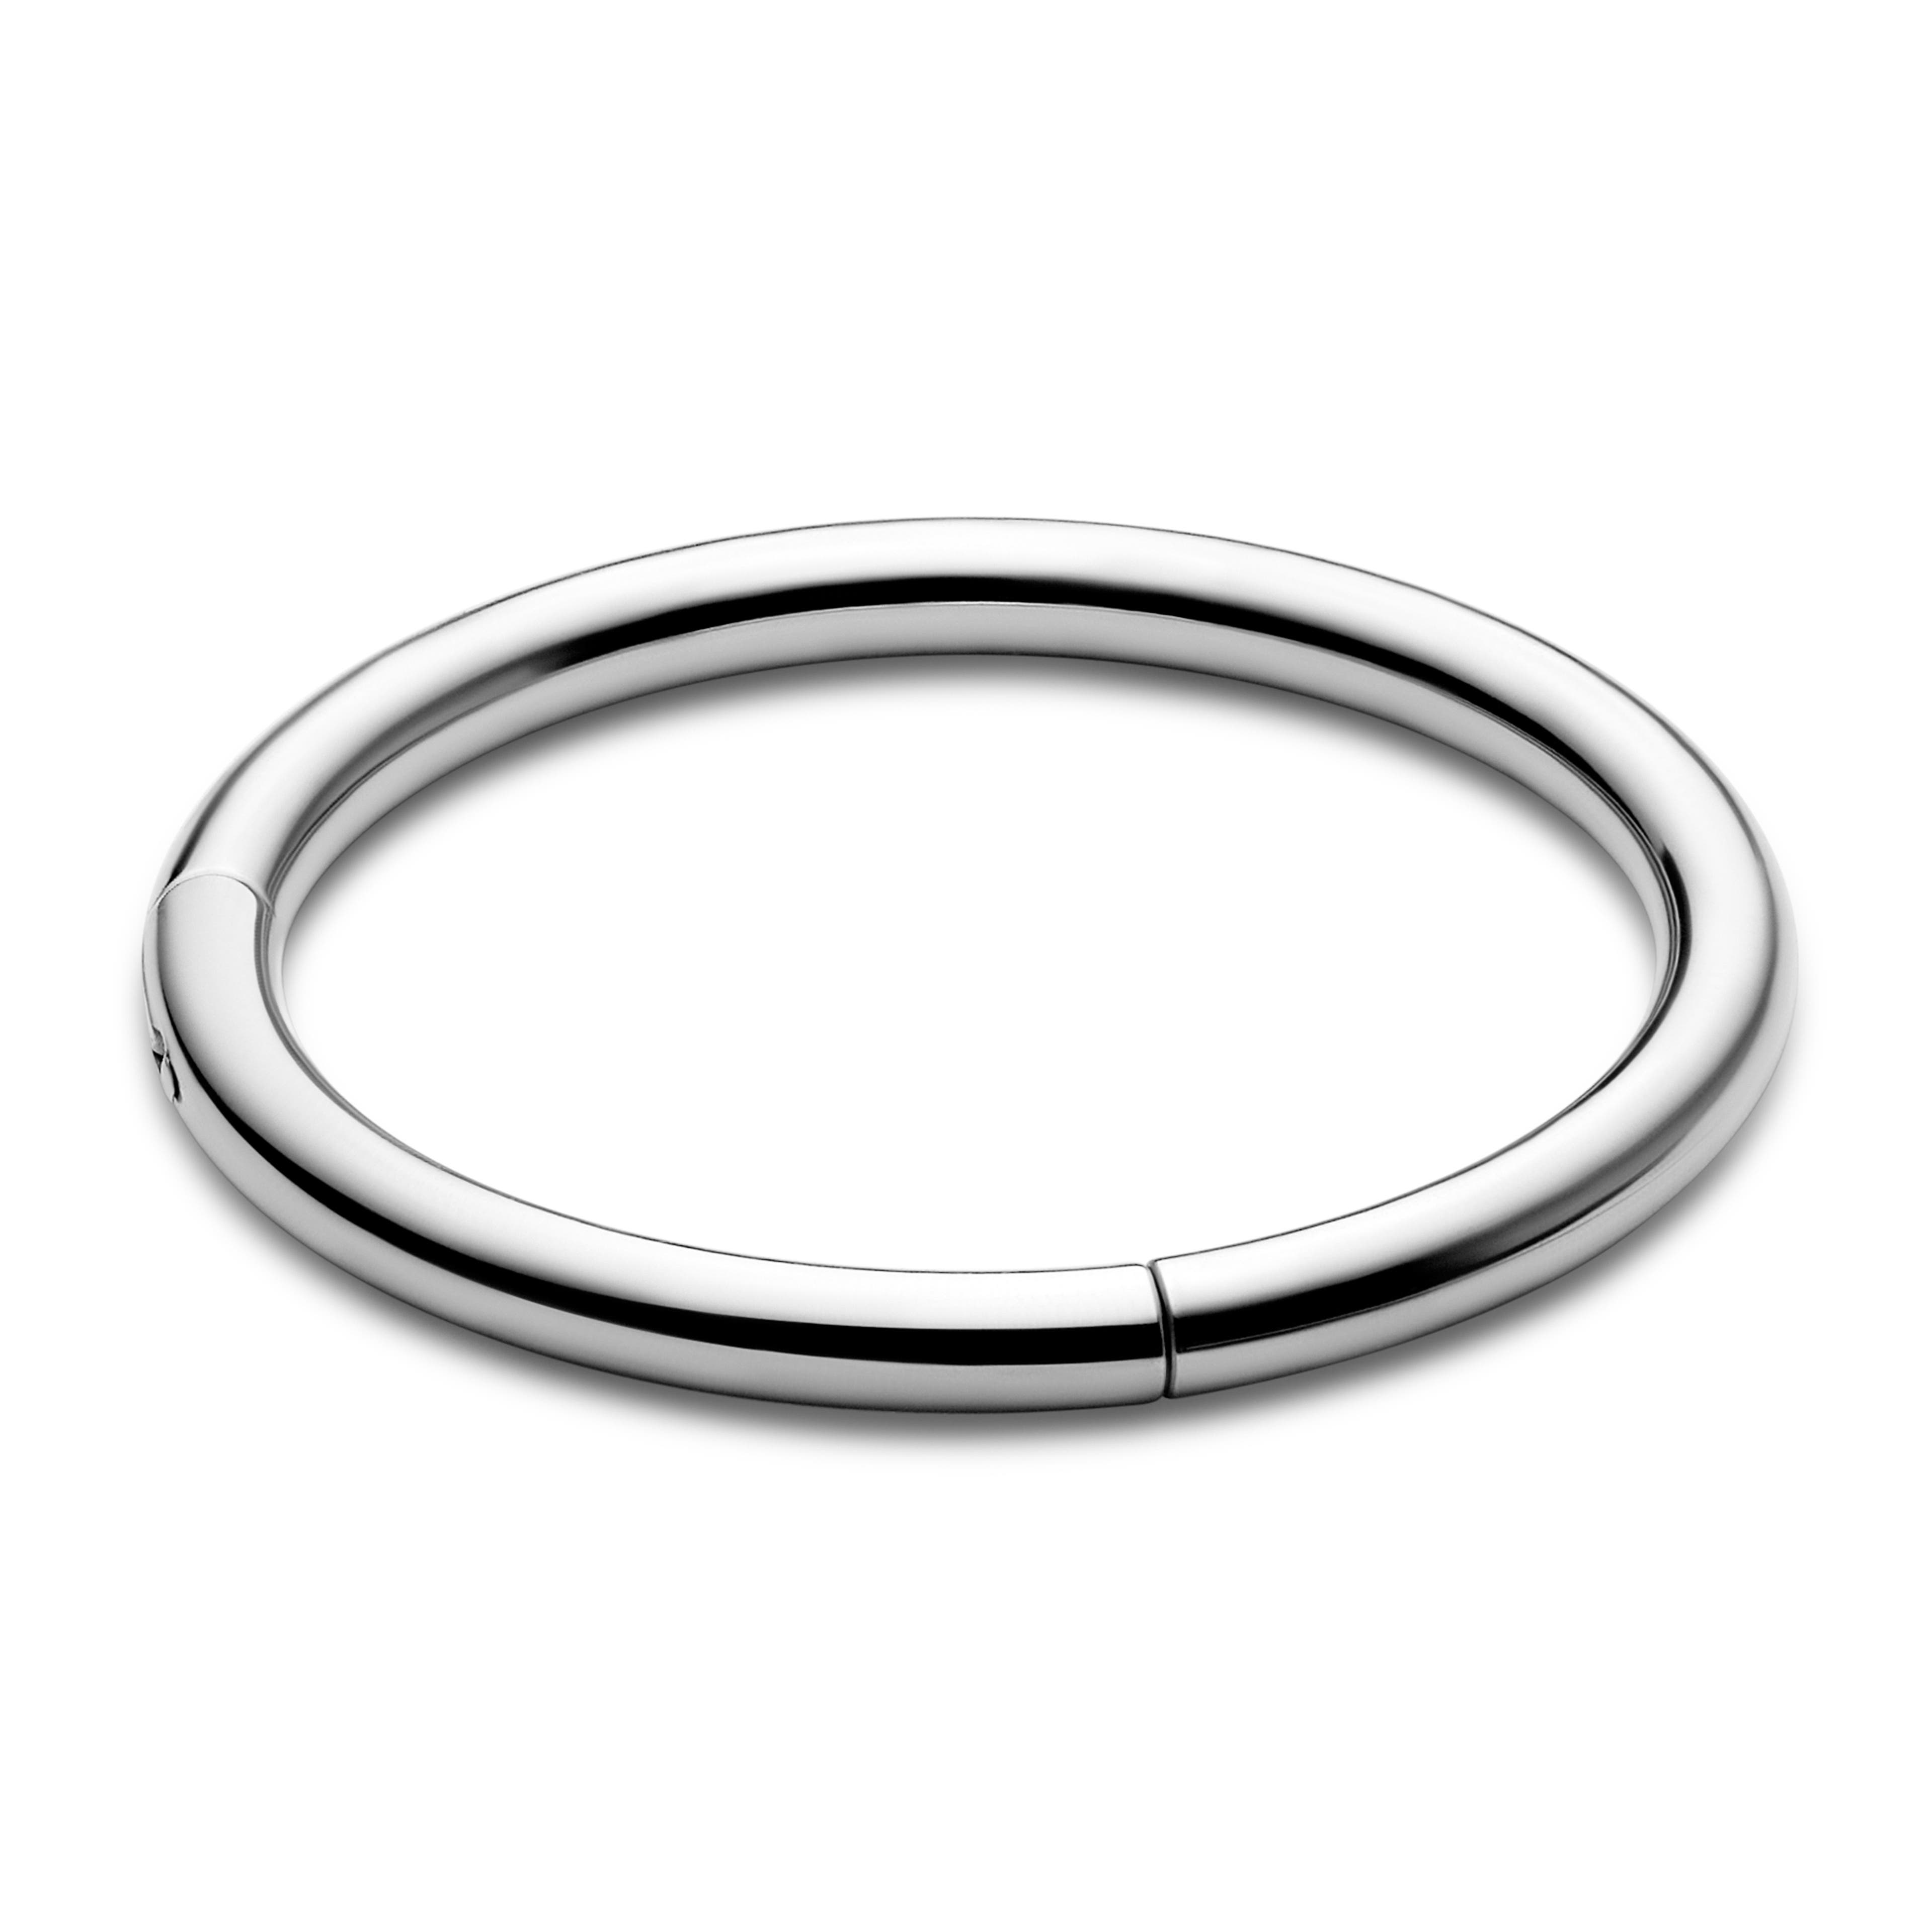 10 mm Silver-tone Surgical Steel Piercing Ring